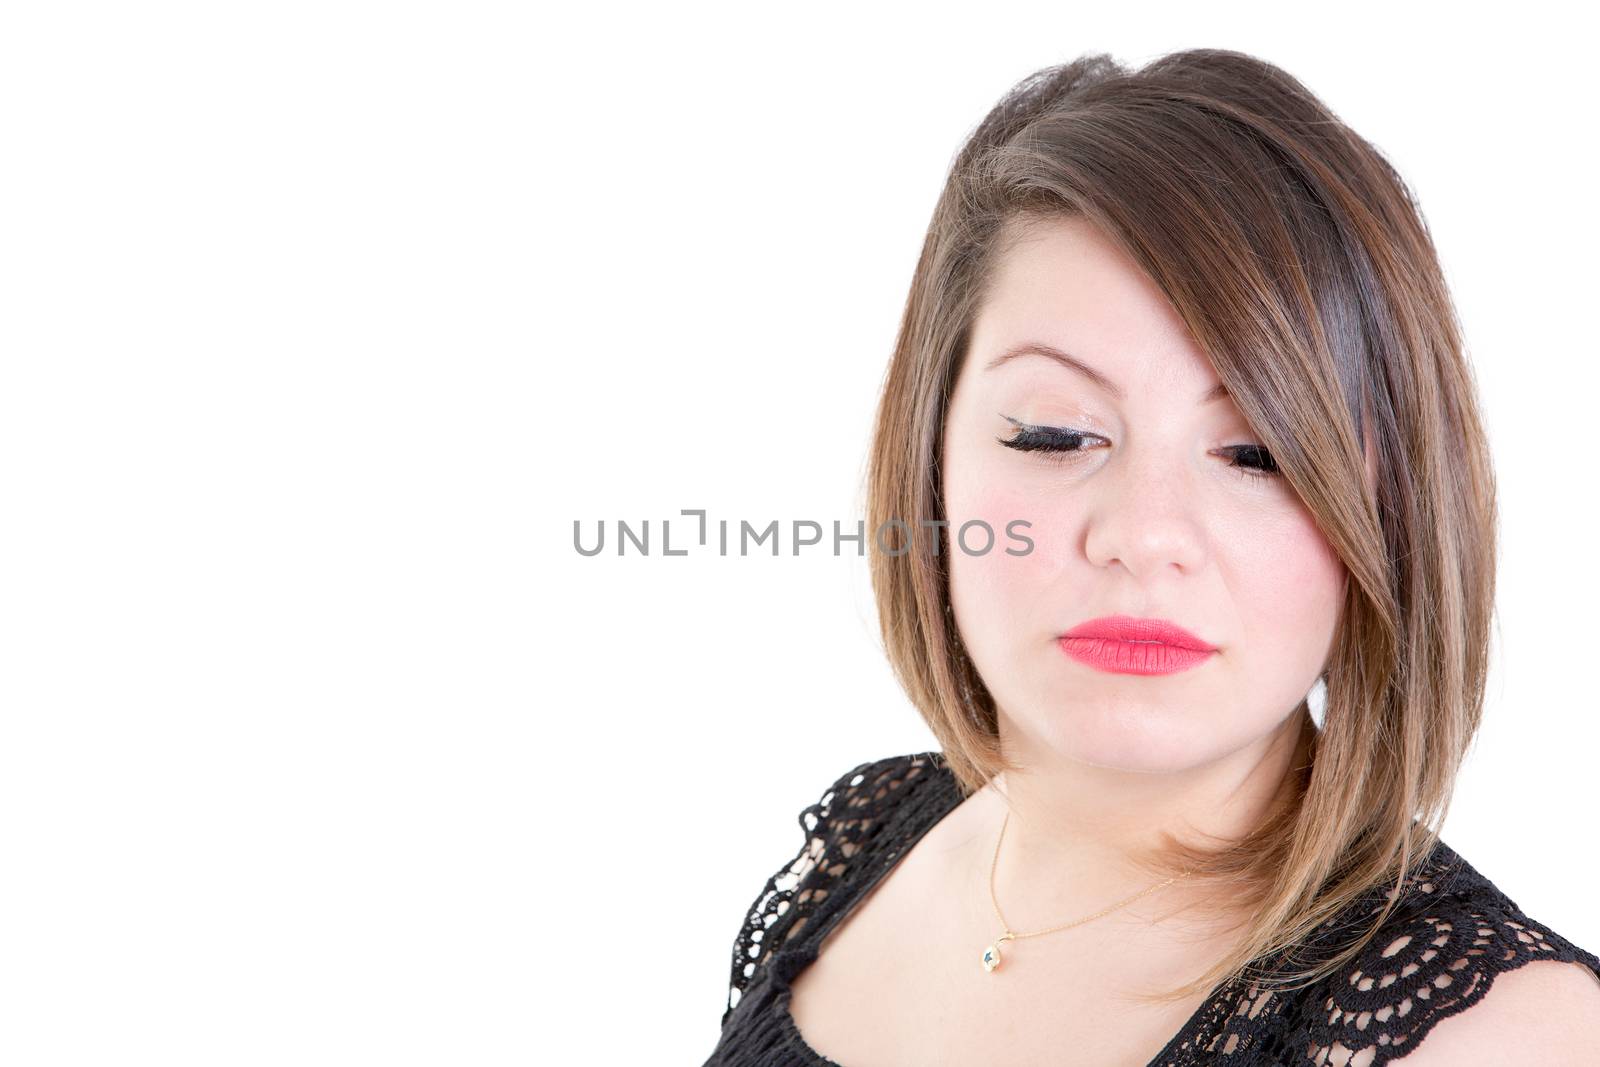 Close up Thoughtful Young Woman Looking Down Against White Background with Copy Space on the Left Side.